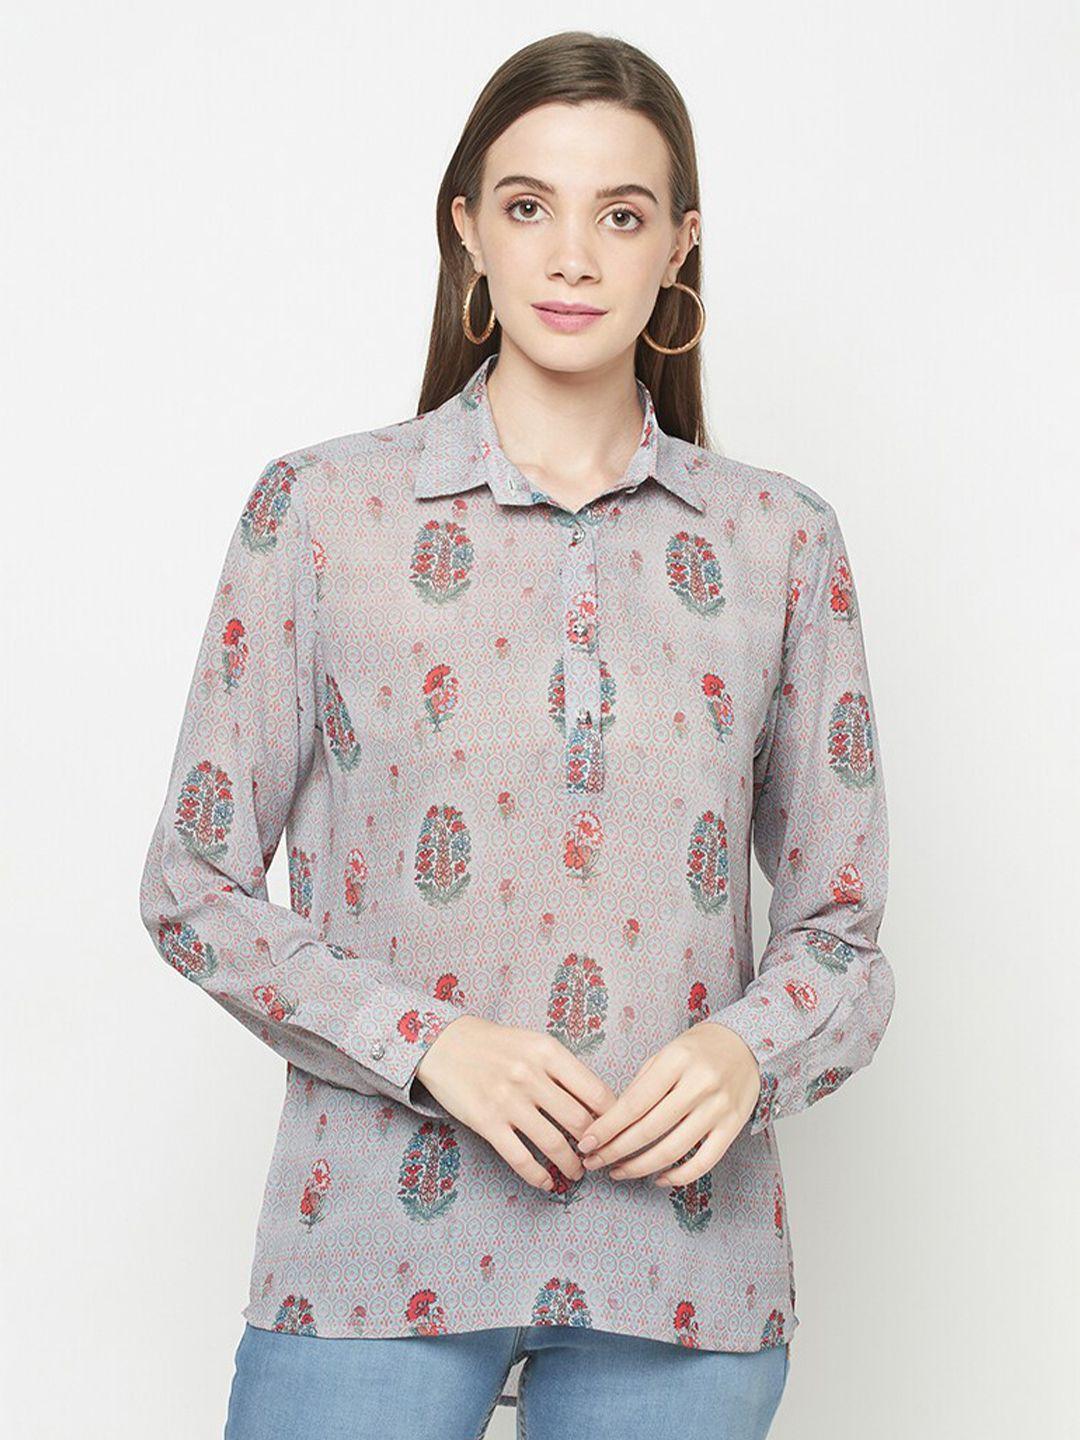 safaa grey & red print georgette shirt style top